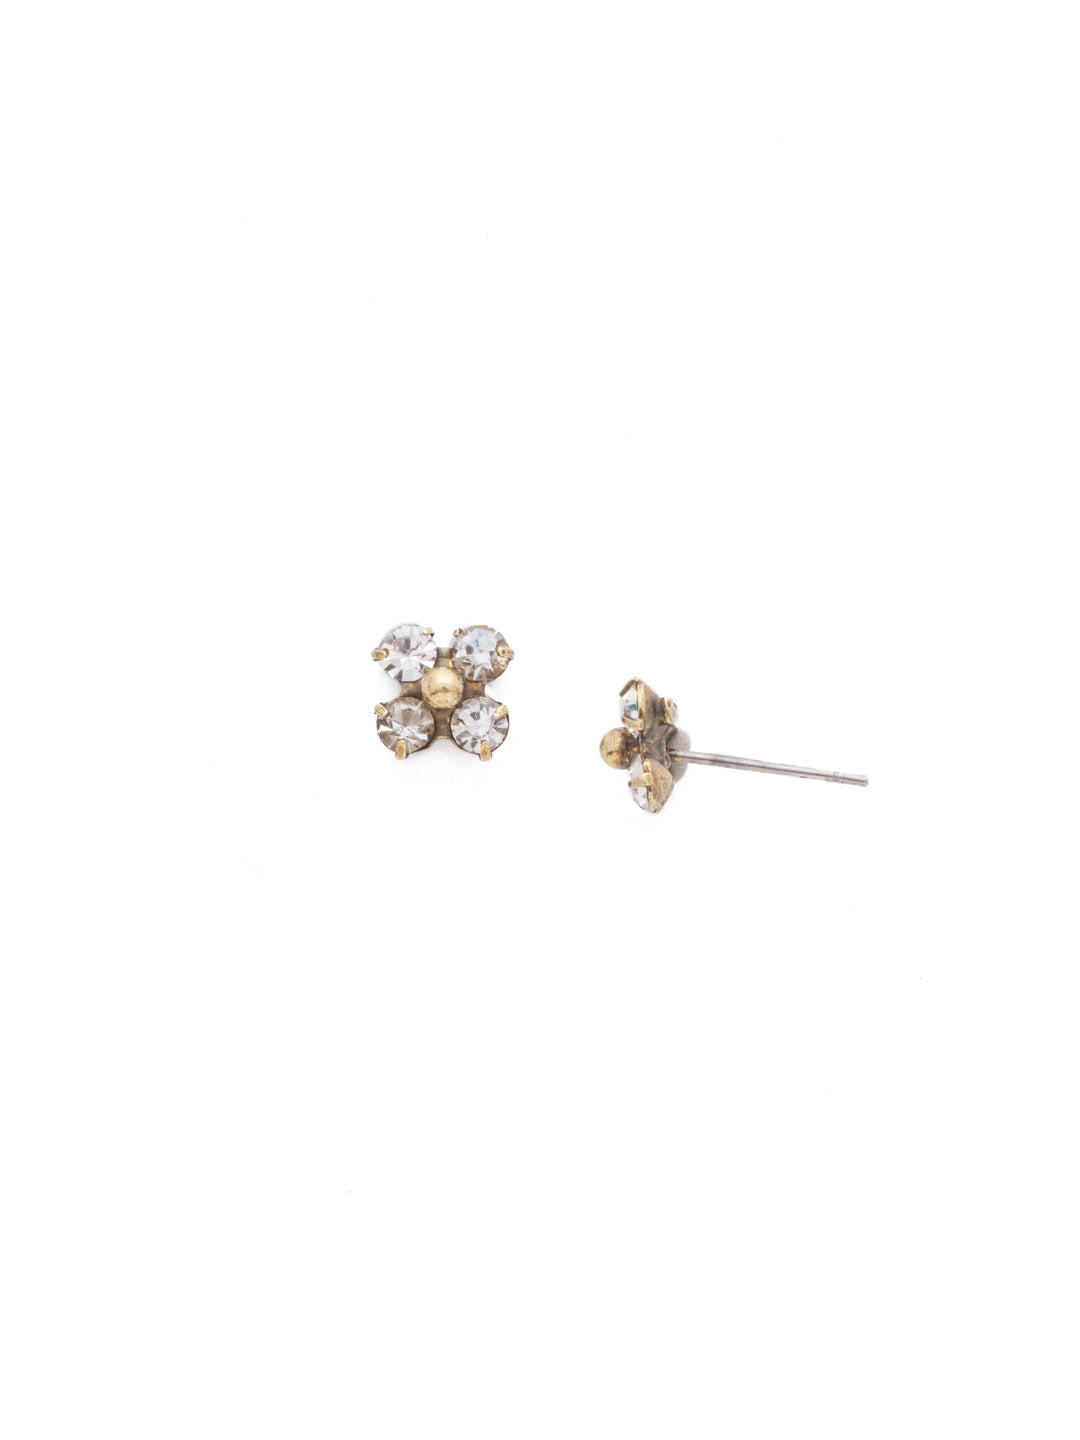 Mini Flower Post Earring Stud Earrings - EDH40AGCRY - Our Mini Flower Post Earring is super cute and trendy. Add these to any look for some flair - and sparkle! From Sorrelli's Crystal collection in our Antique Gold-tone finish.